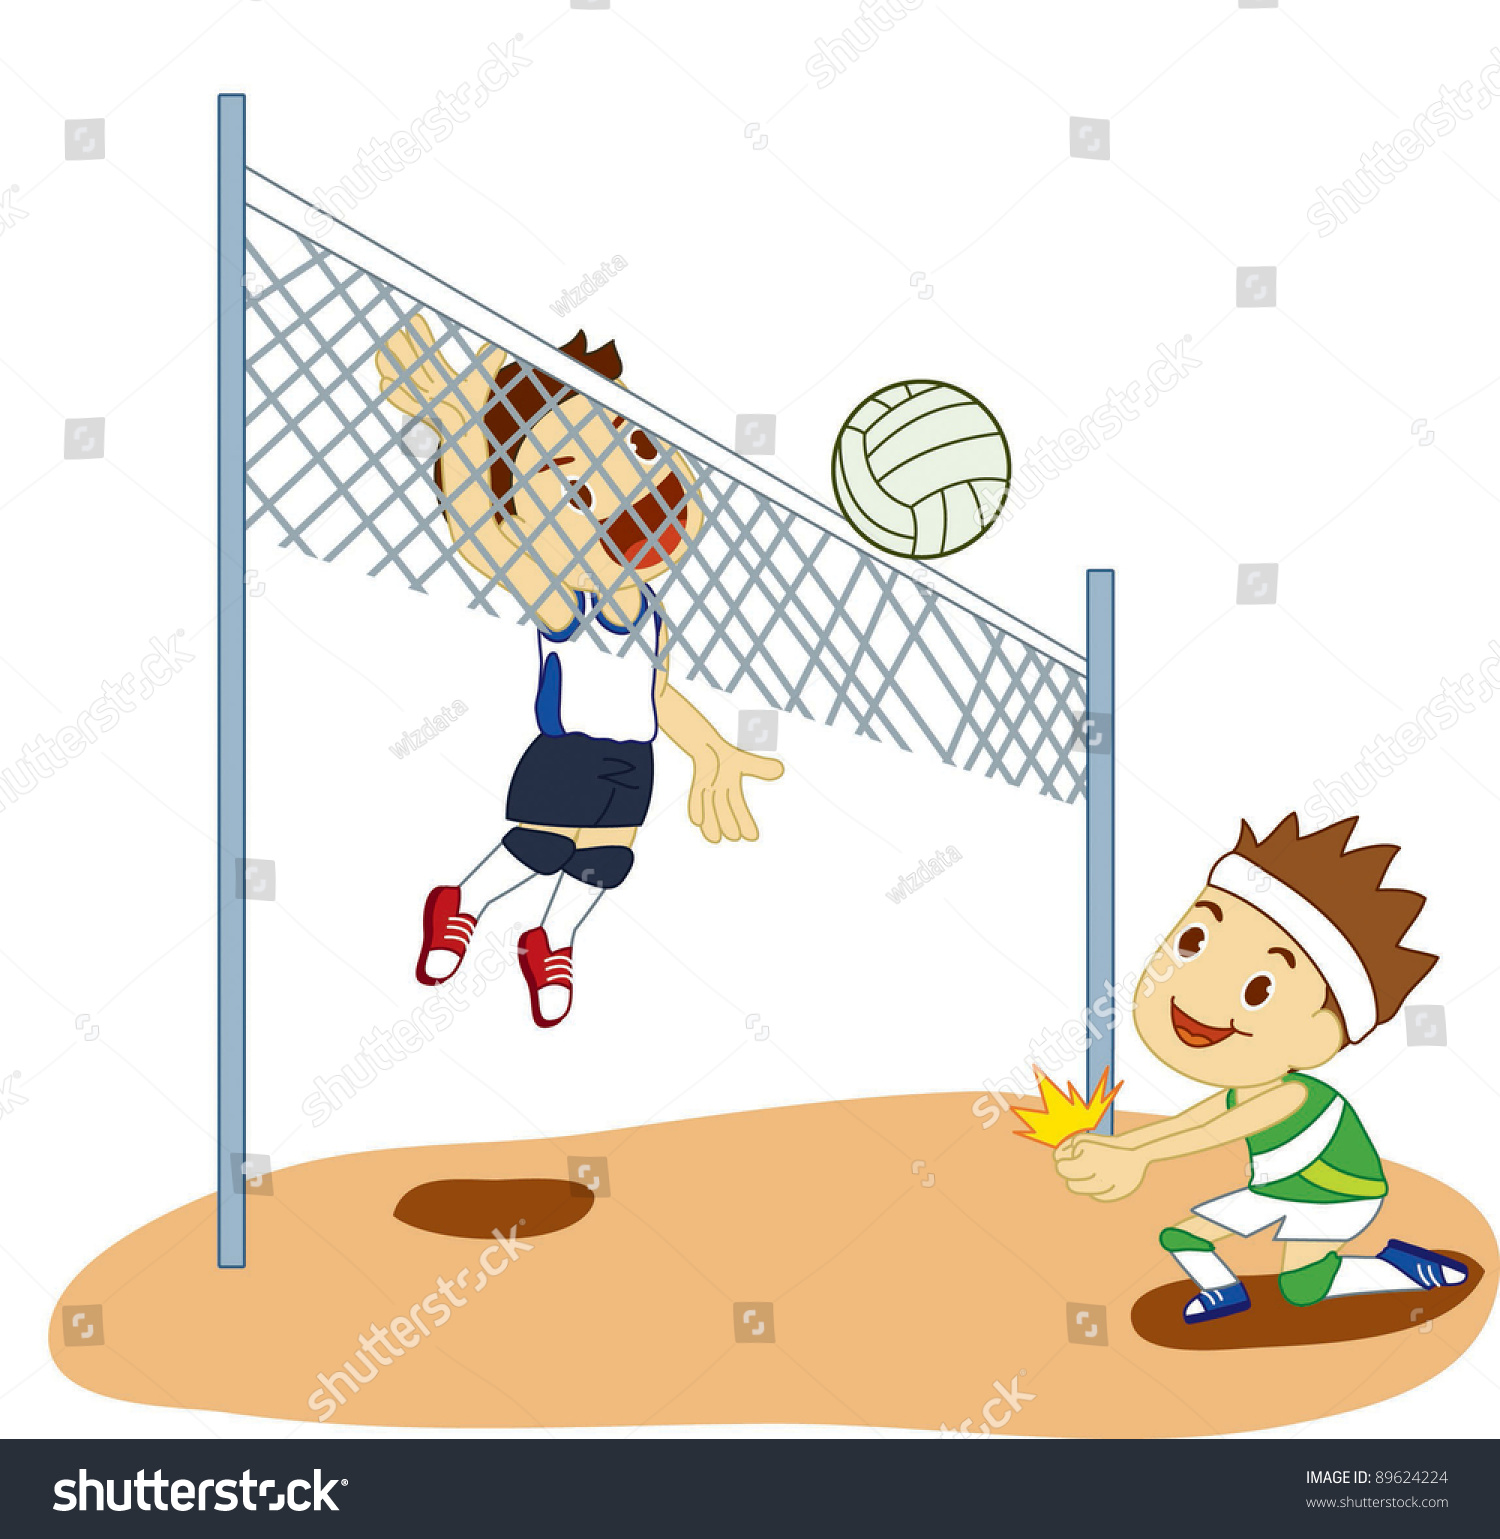 volleyball game clipart - photo #26